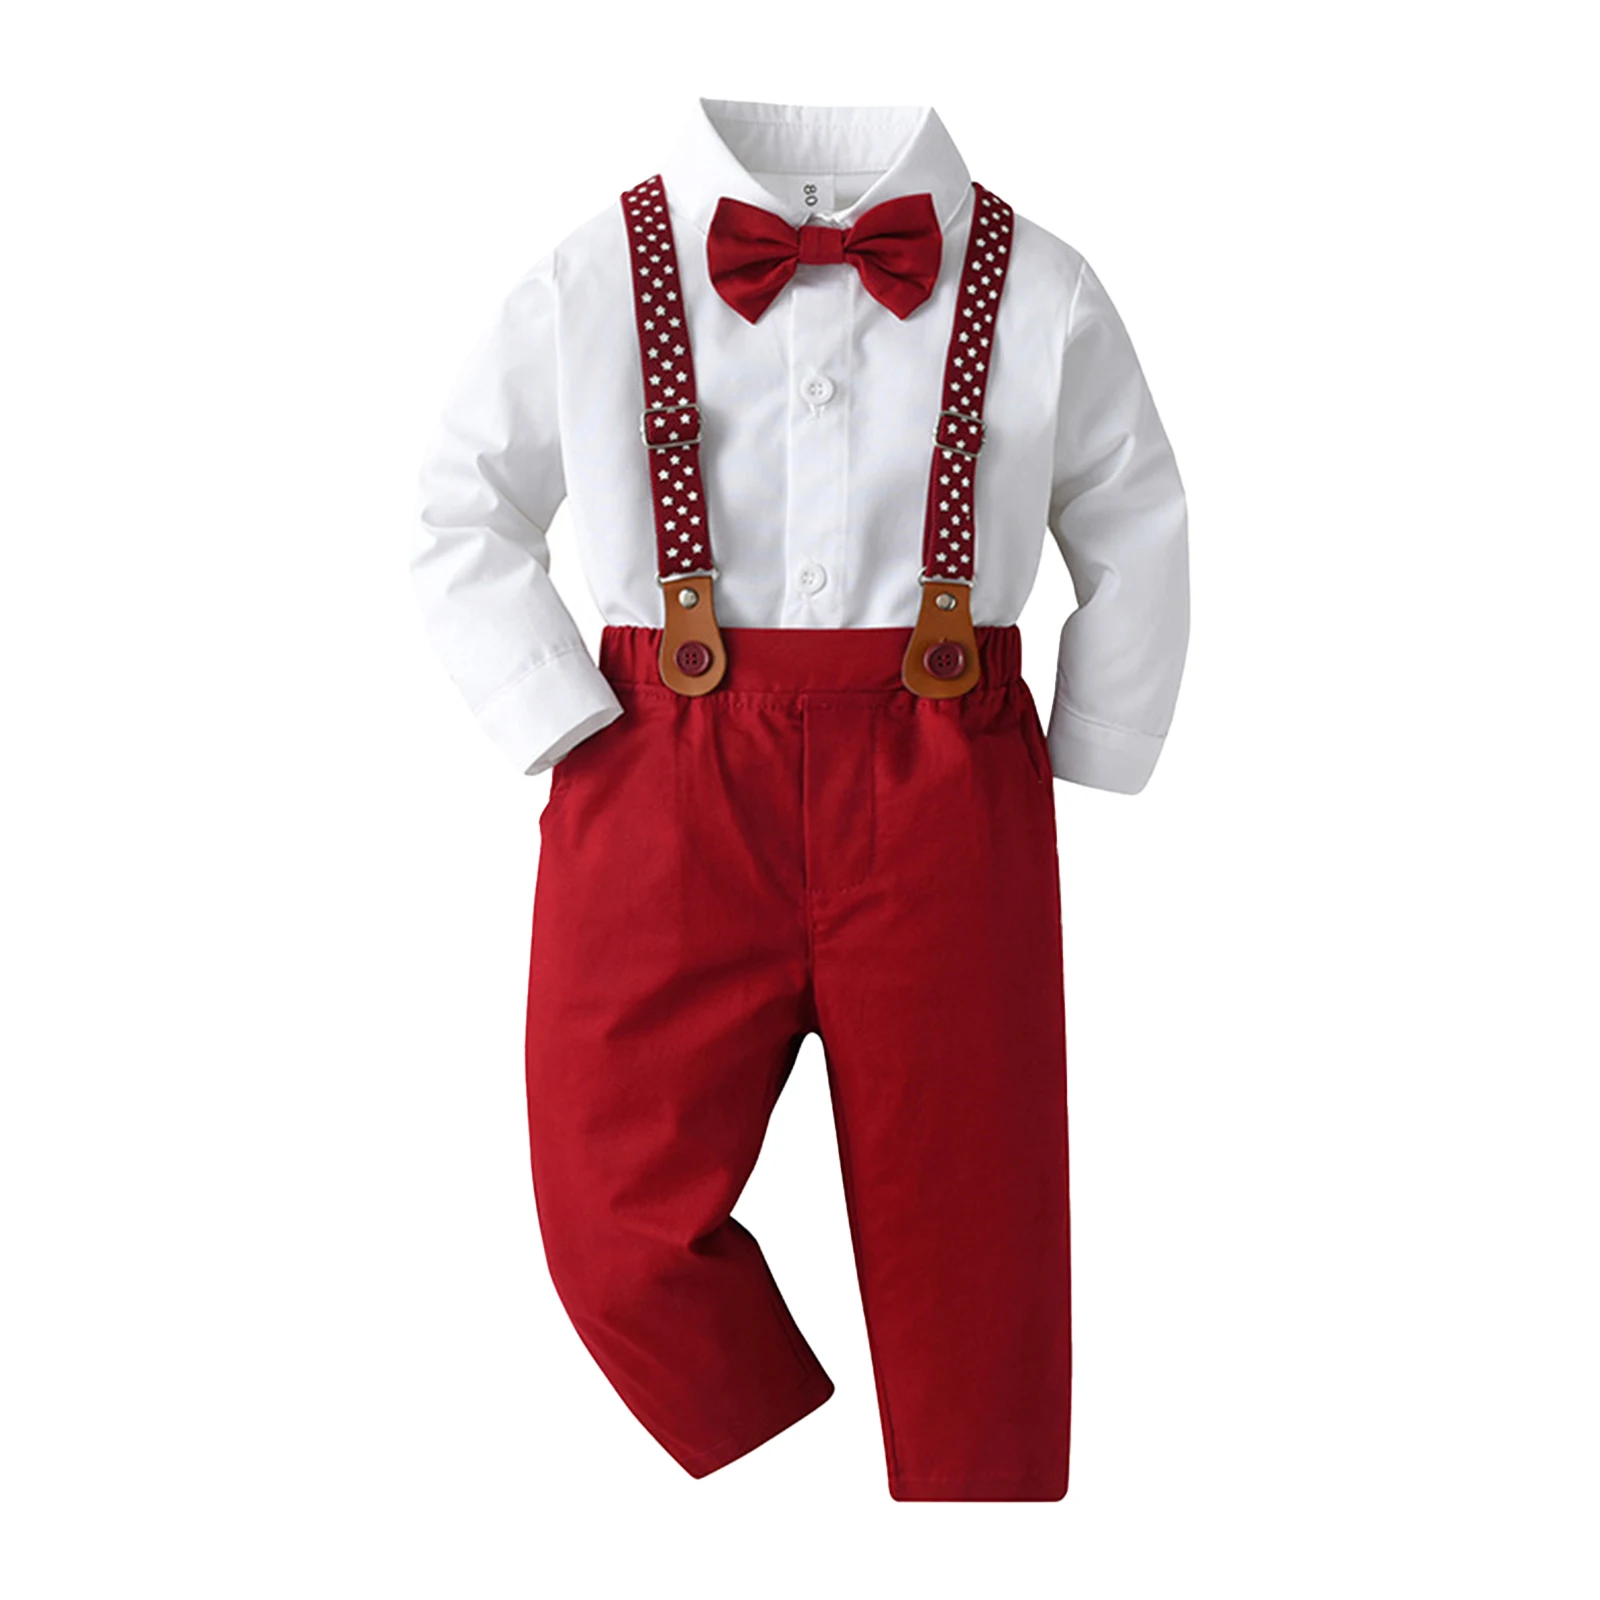 Baby Boys Gentleman Outfit Cotton Clothes Birthday Party Wedding Prom Gown Long Sleeve Shirt Top+Bowtie+Suspender Pants 3Pcs/Set 6pcs letter pads with 3pcs envelopes floral writing papers party invitation gift envelopes korean stationery office supplies